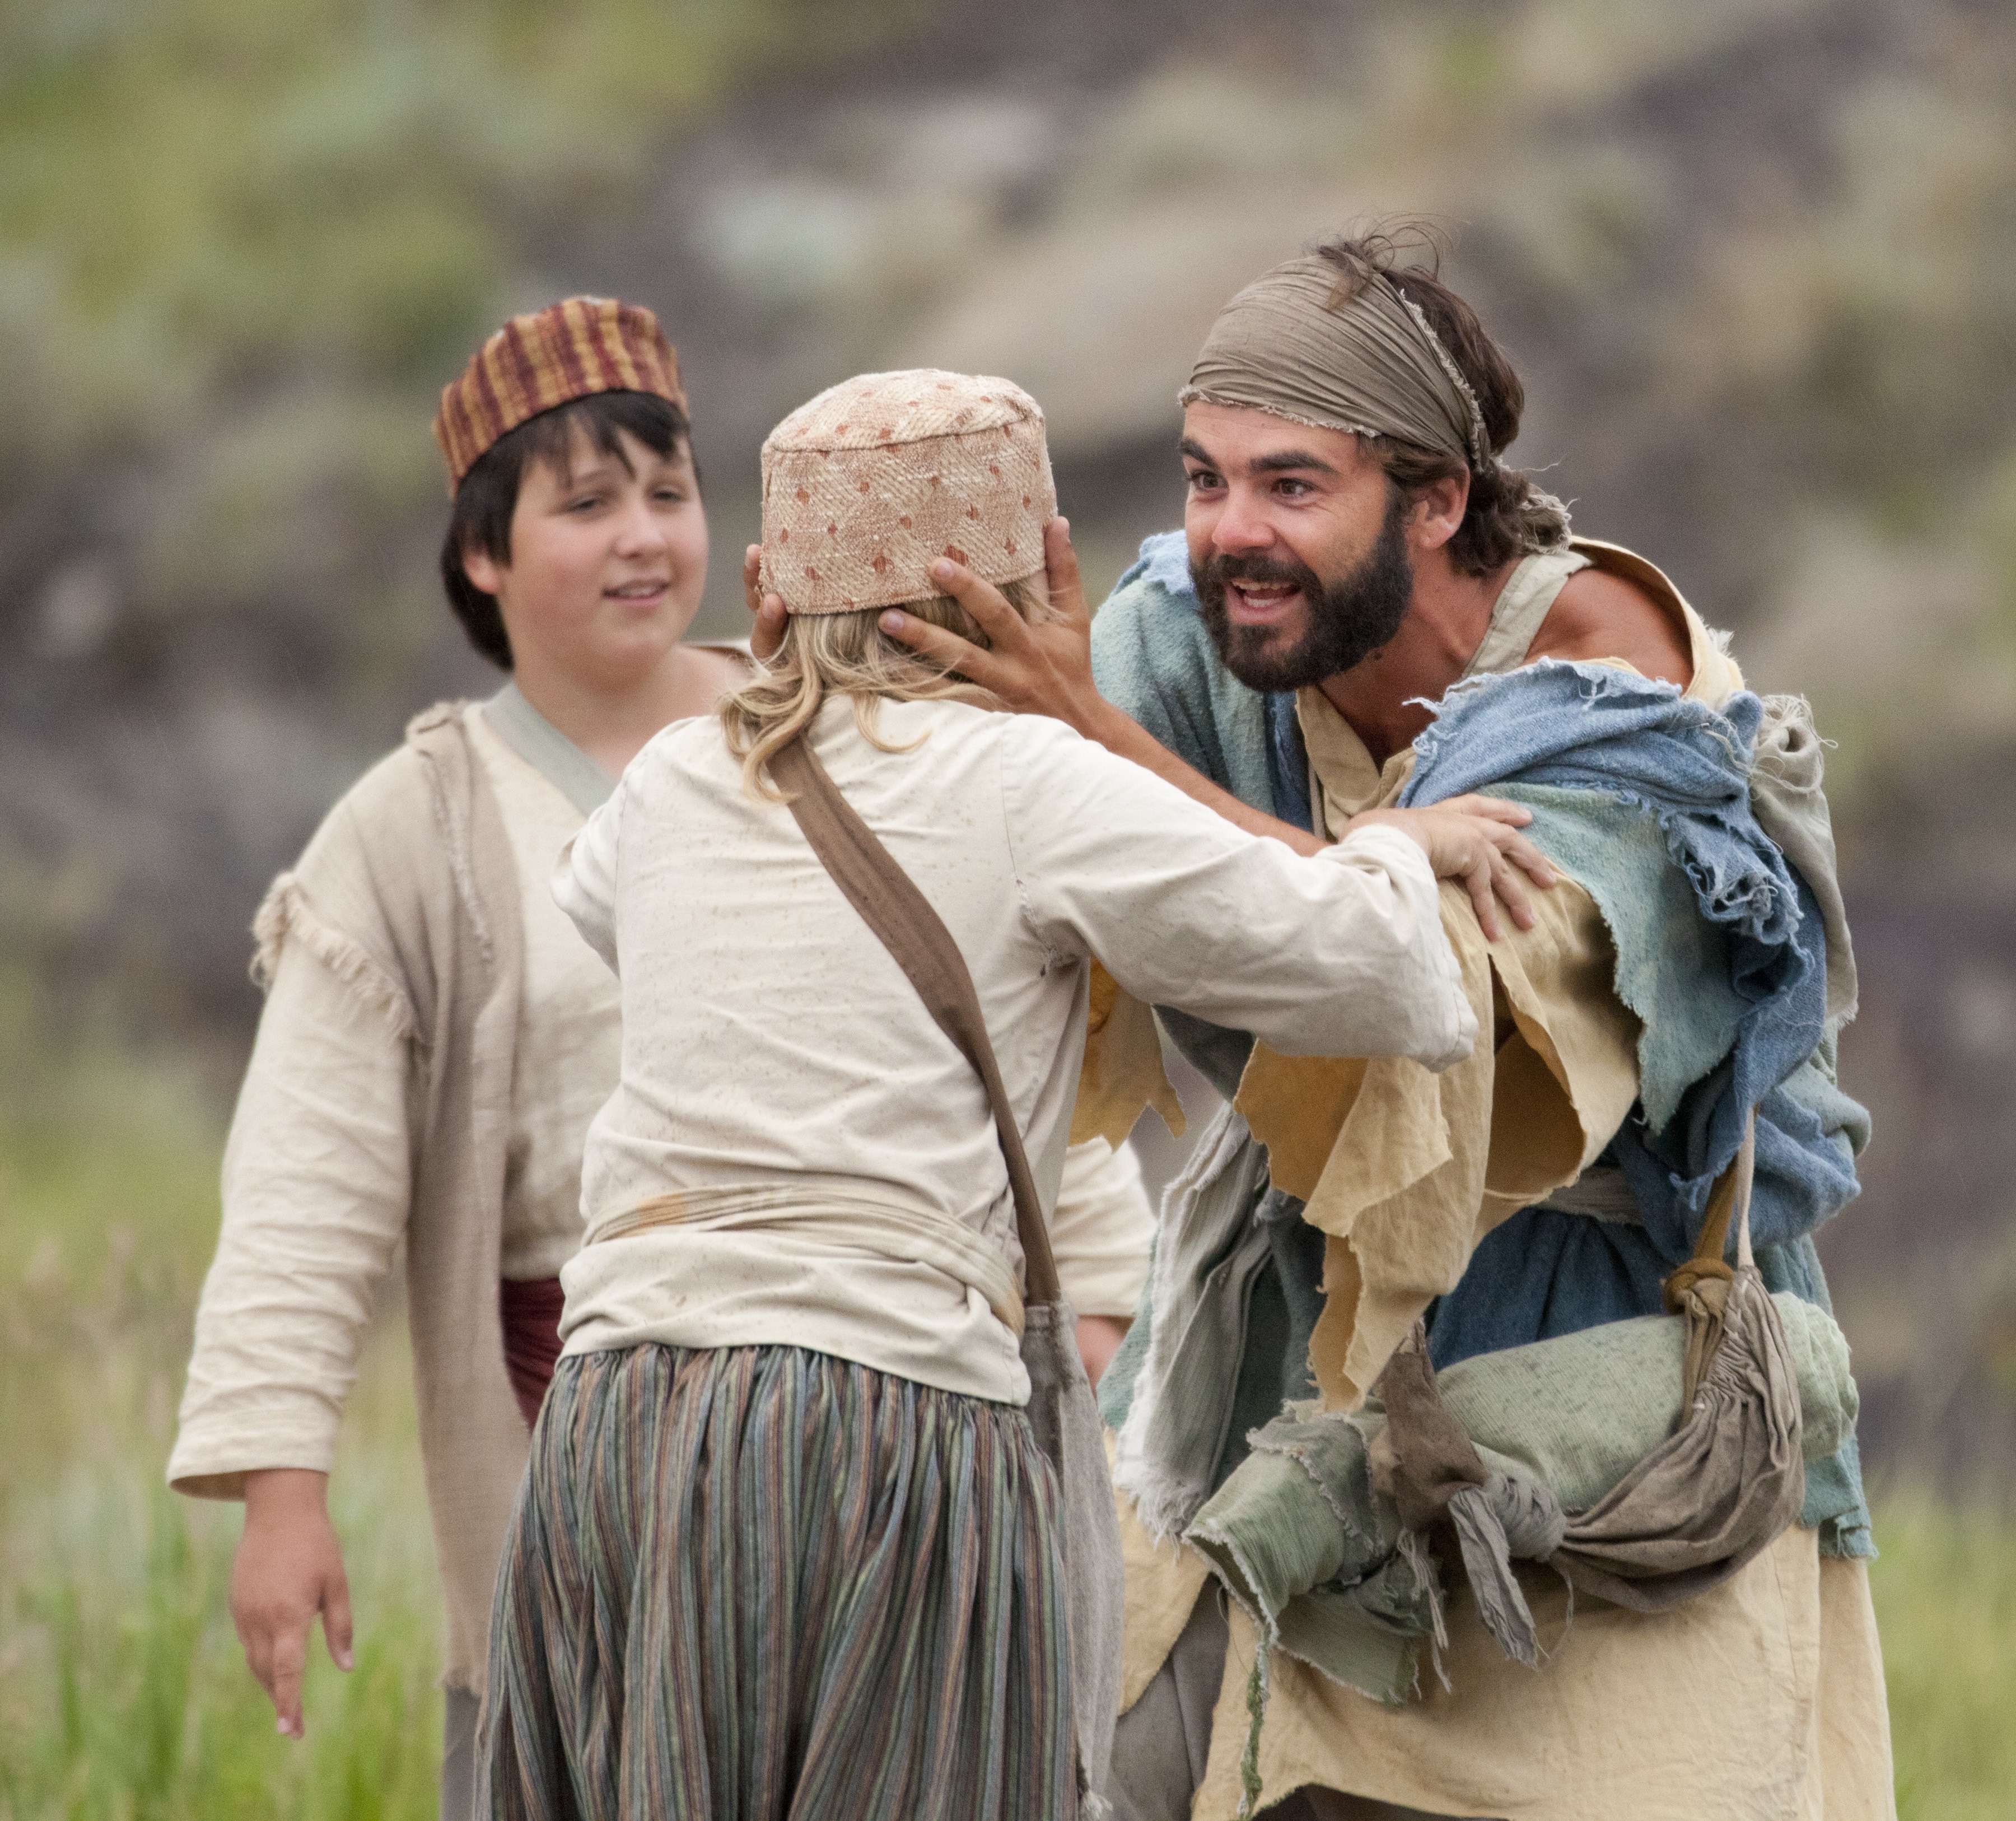 AUTHENTICITY - The annual Canadian Badlands Passion Play runs this July near Drumheller